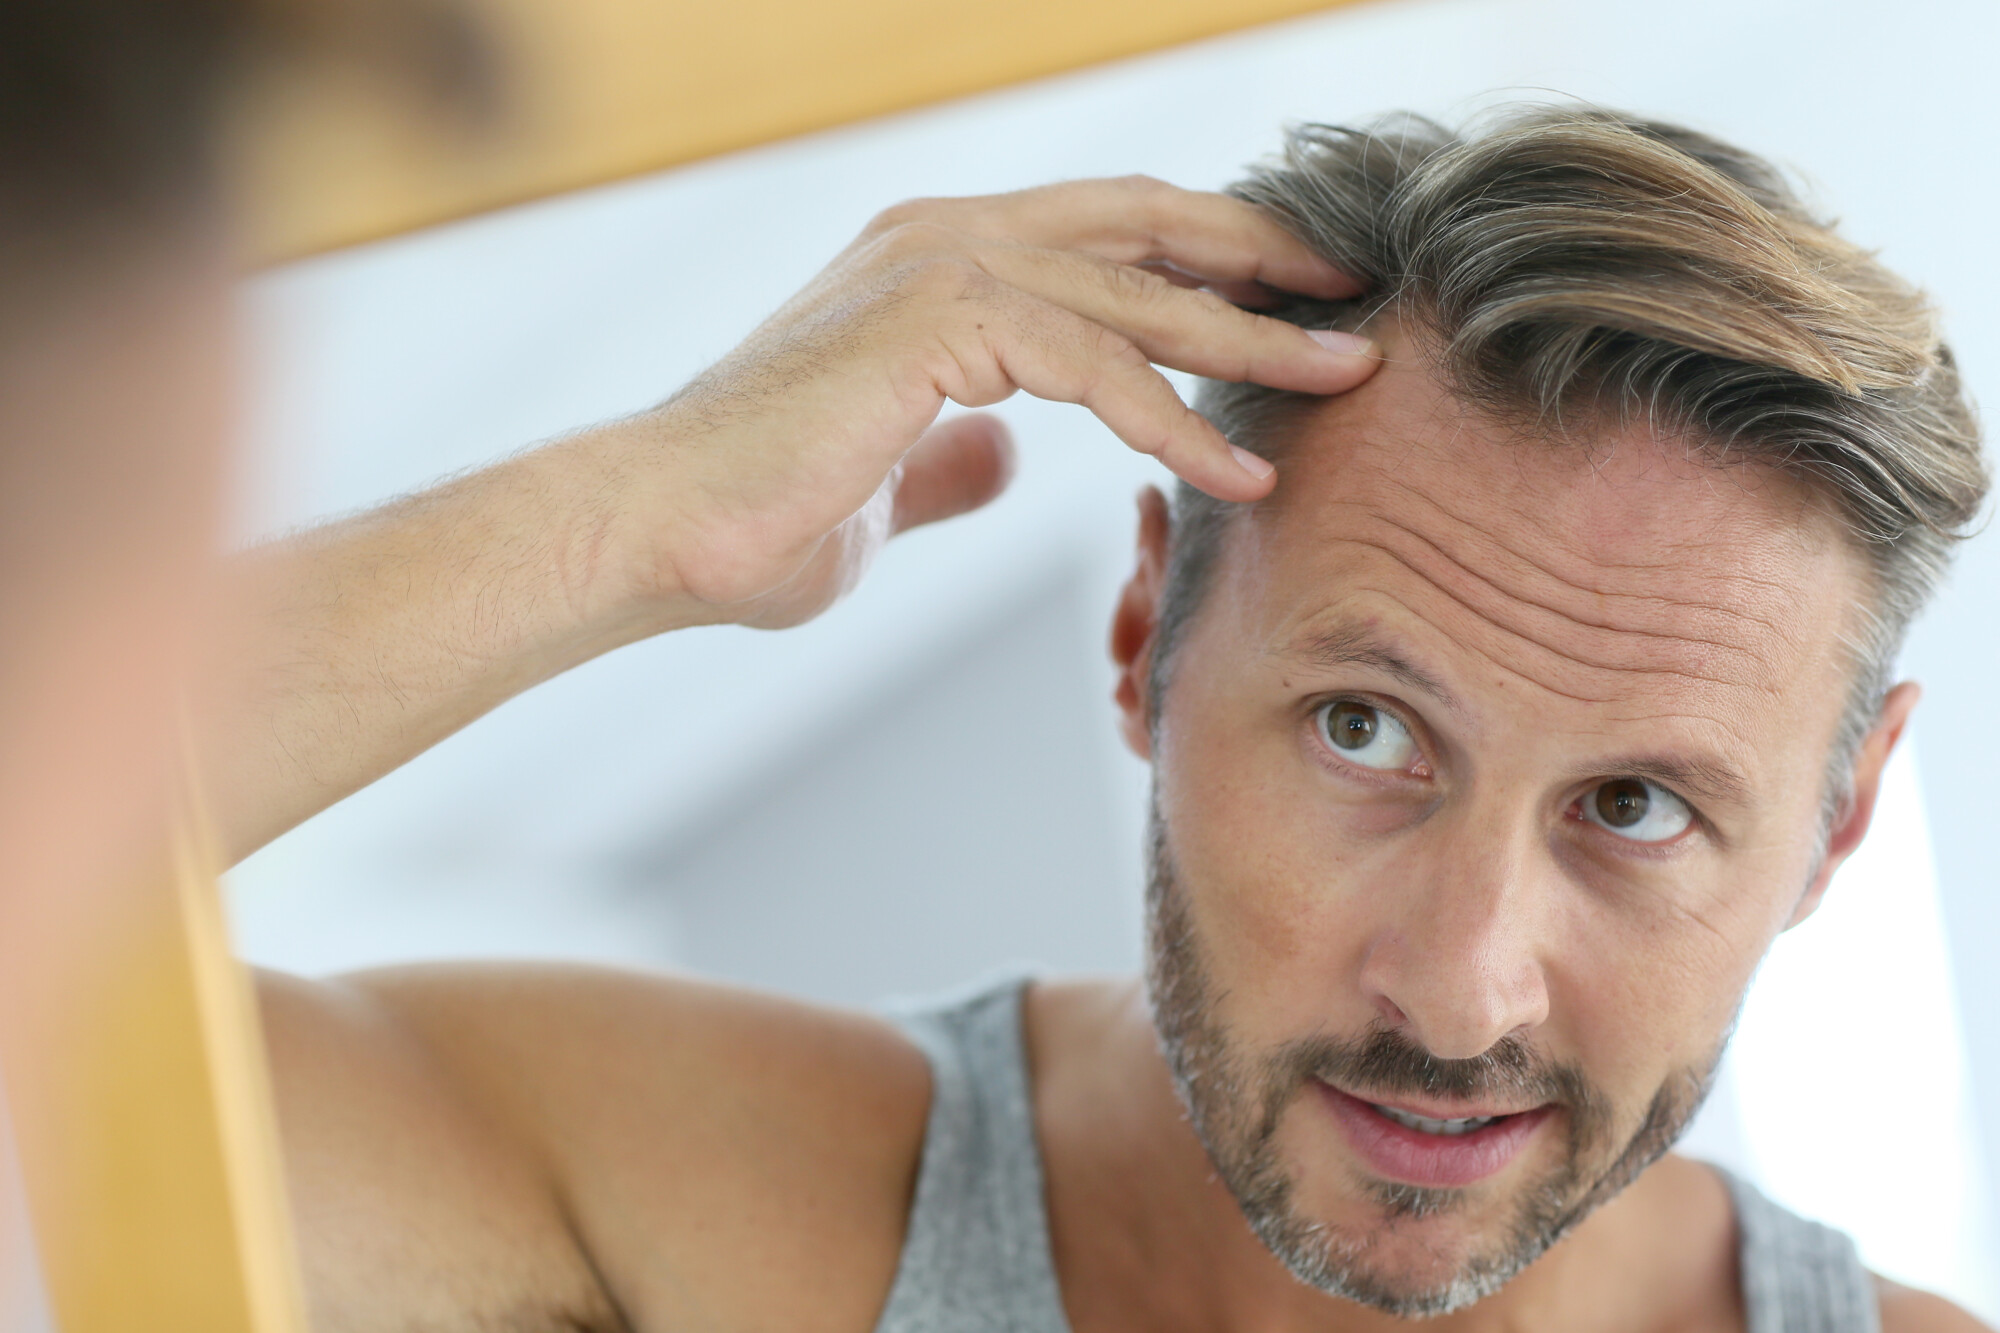 Propecia vs Rogaine for Men: Which Is Better for Fighting Hair Loss?